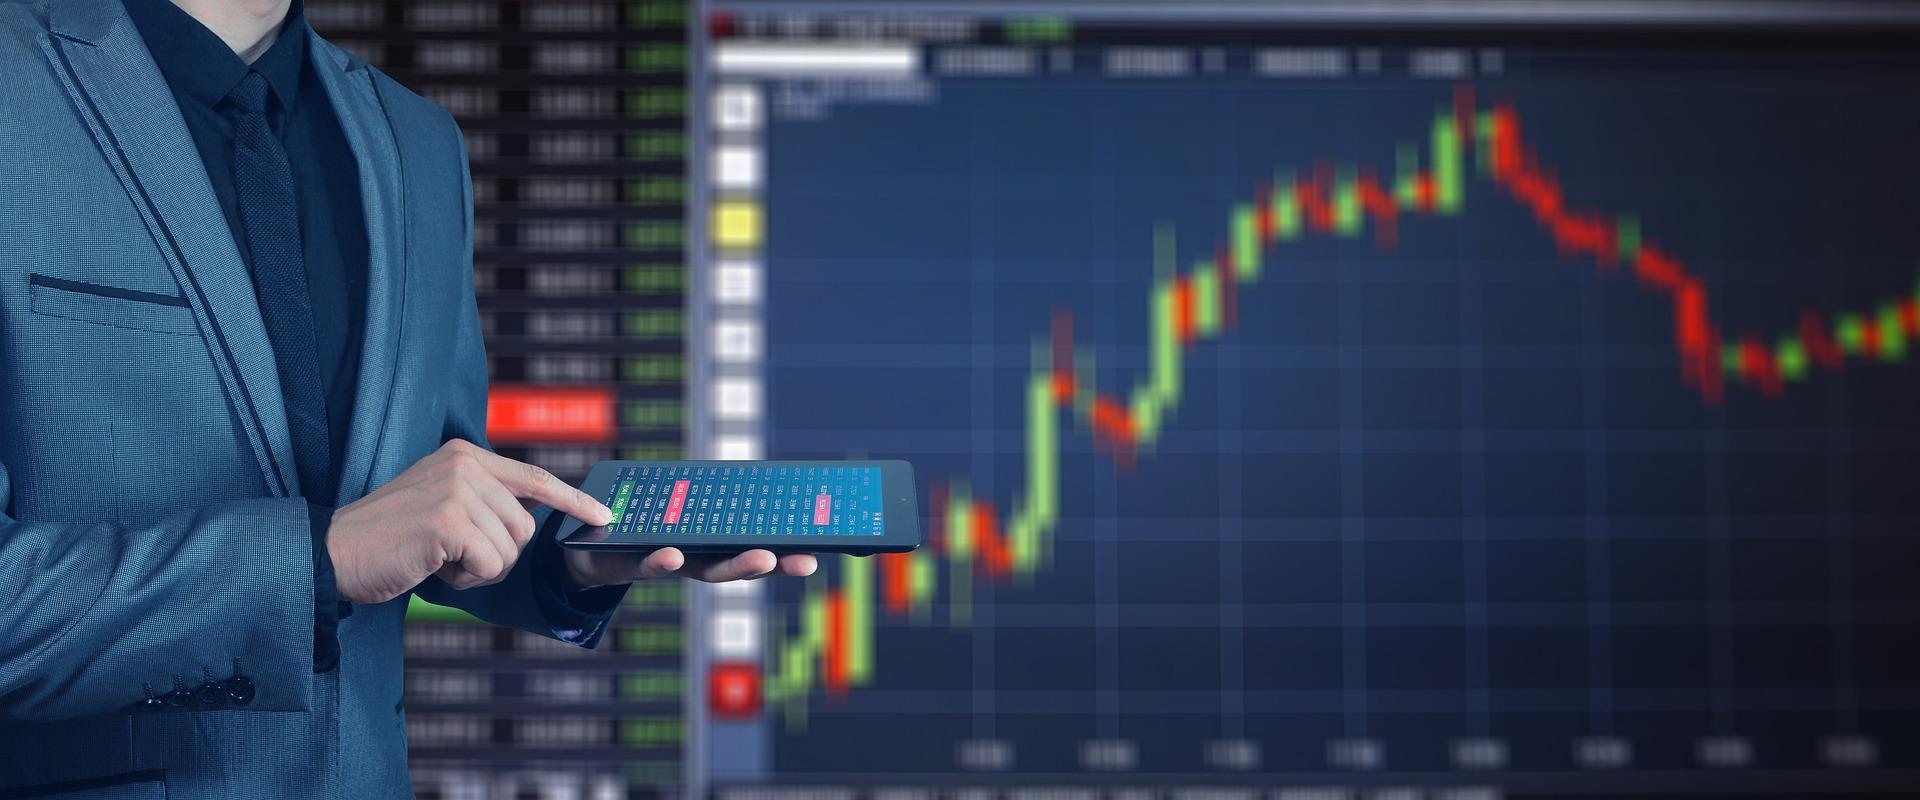 What is algorithmic trading?